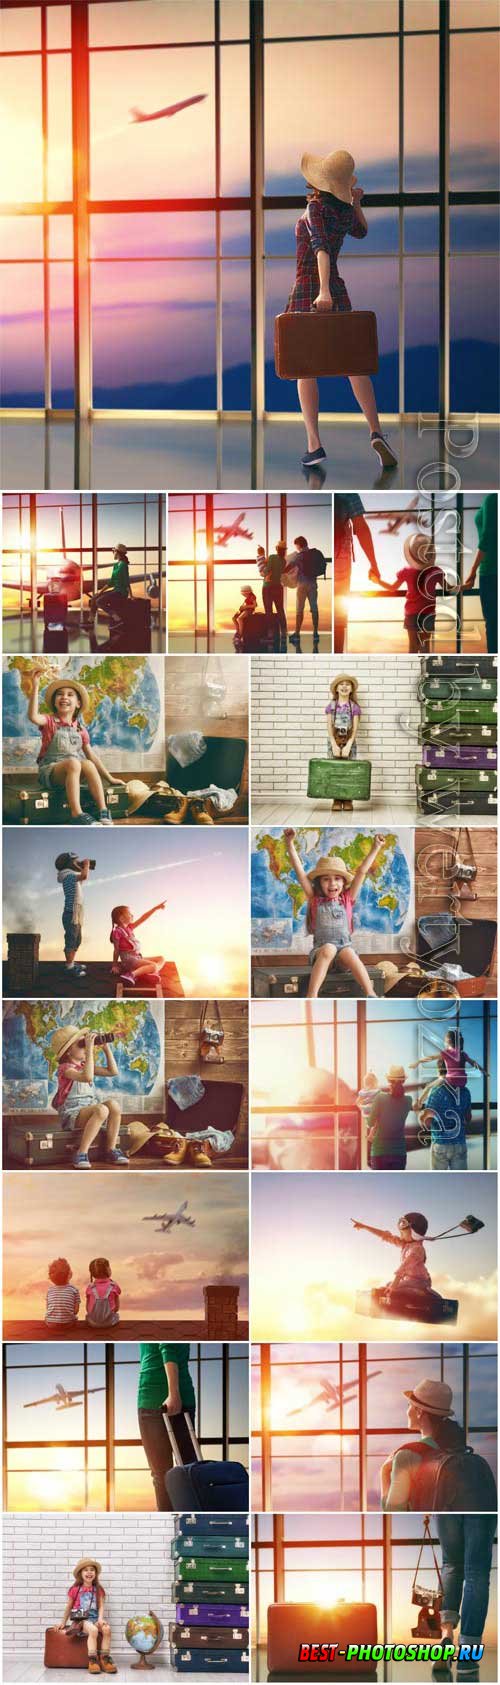 People and travel concept stock photo